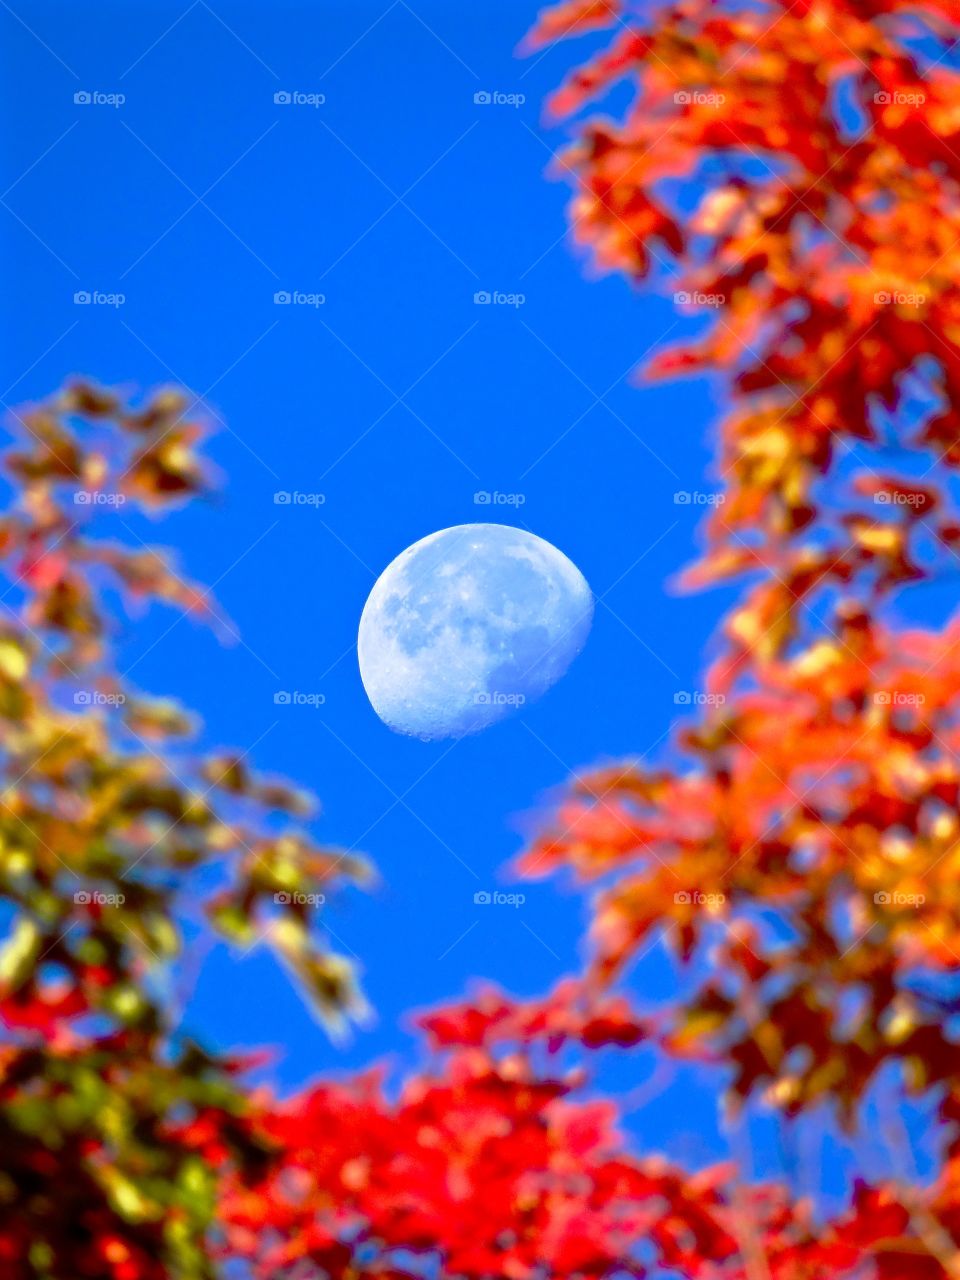 daytime moon in autumn. Gorgeous New England foliage breaks way to reveal a daytime three quarter moon in autumn.